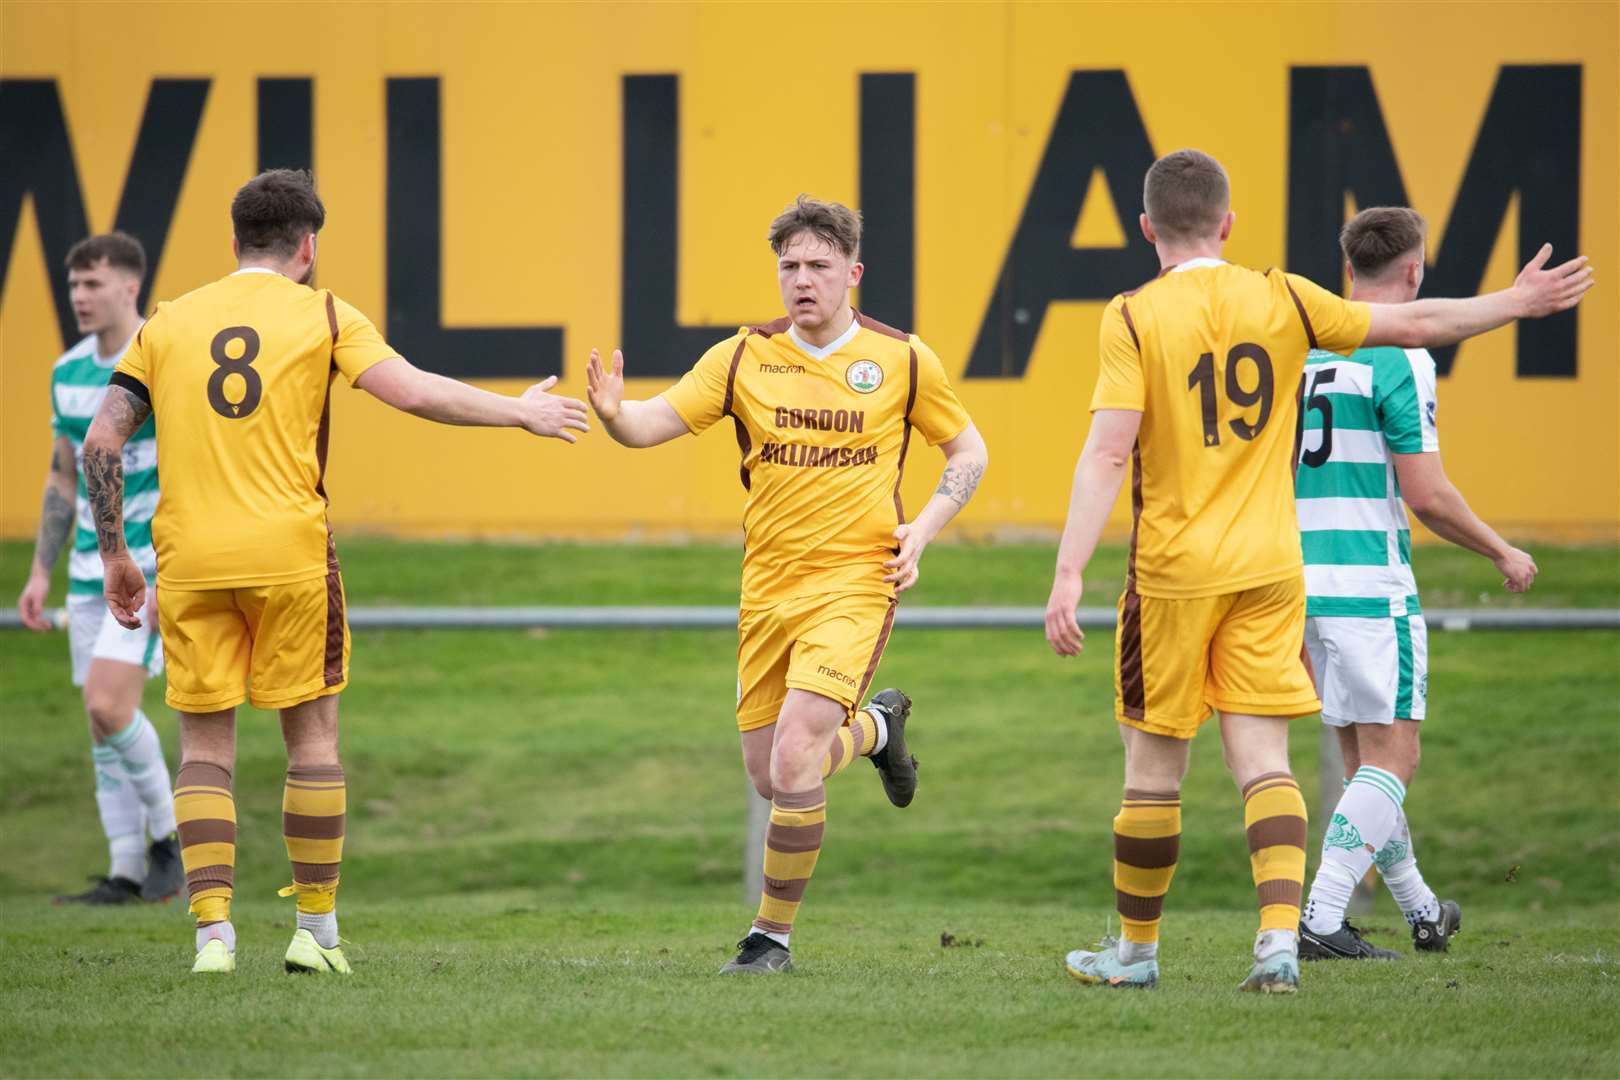 Forres' Shaun Morrison after his goal. ..Forres Mechanics FC (2) vs Buckie Thistle FC (3) - Highland Football League 22/23 - Mosset Park, Forres 01/04/23...Picture: Daniel Forsyth..